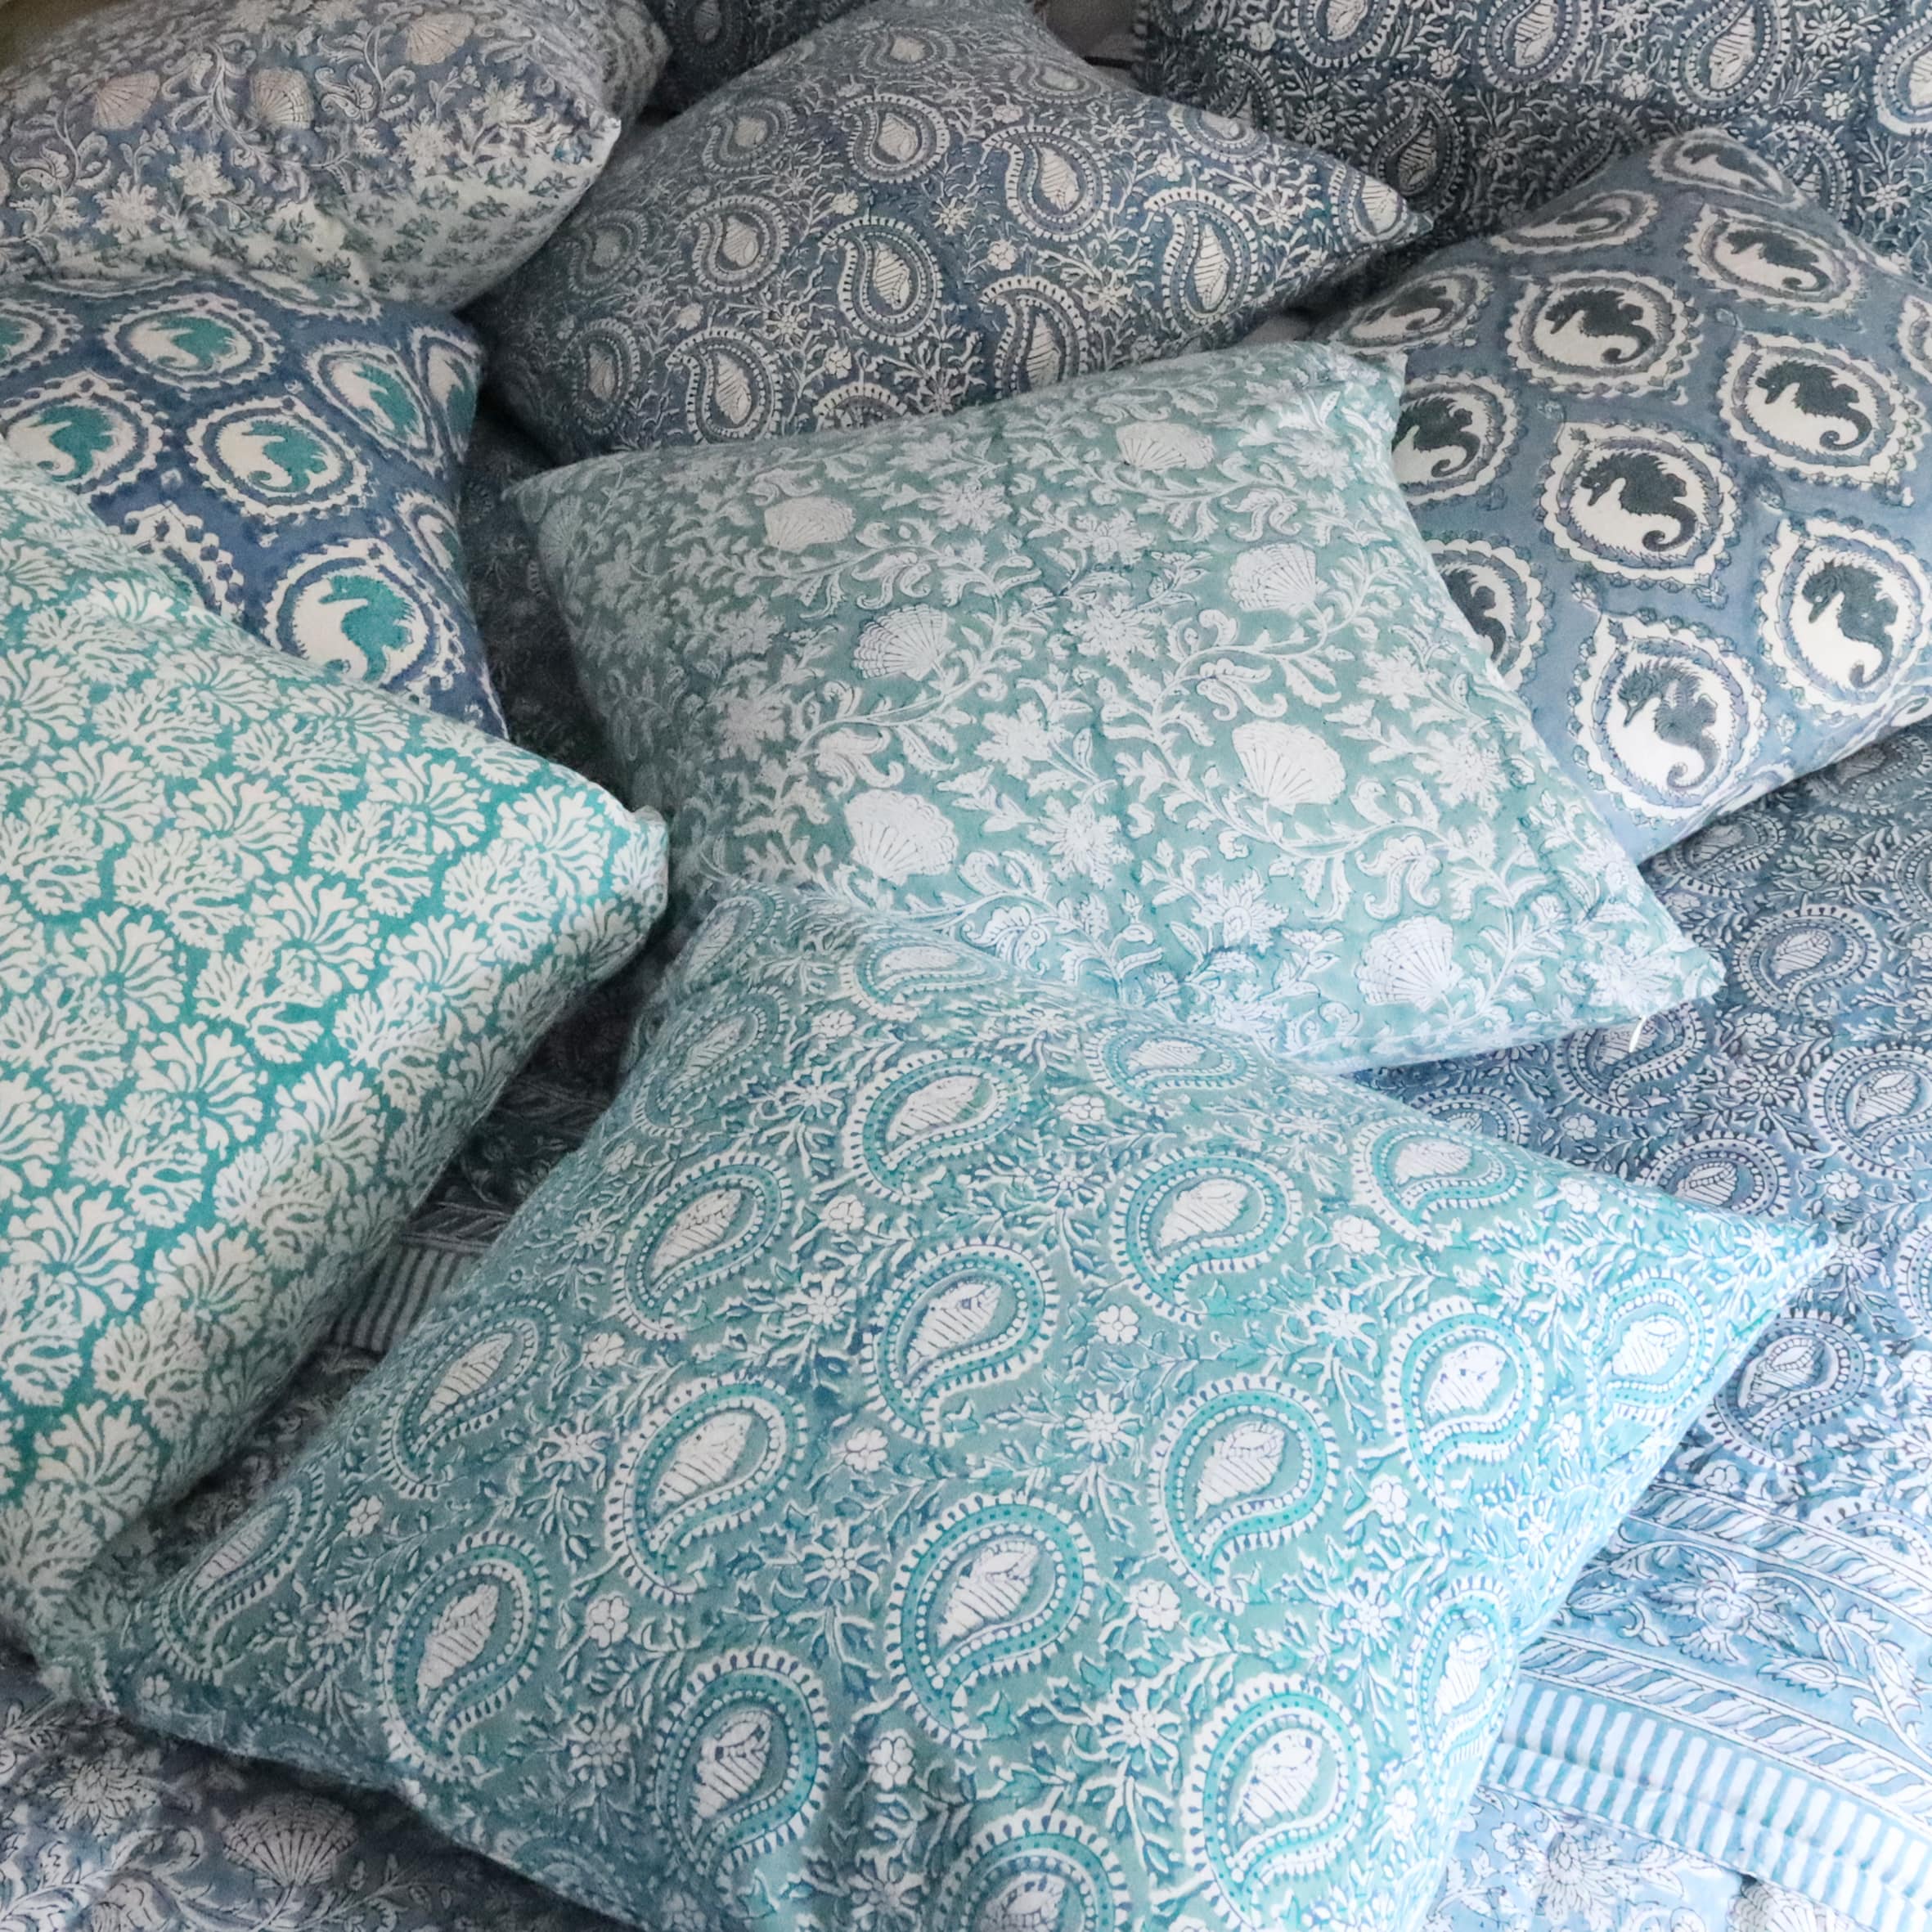 Sea Breeze Seashell Flower cushion which is Hand block printed fabric in a soft blue and the print is swirling shells and tendrils in white on a pile of other Hand block printed cushions